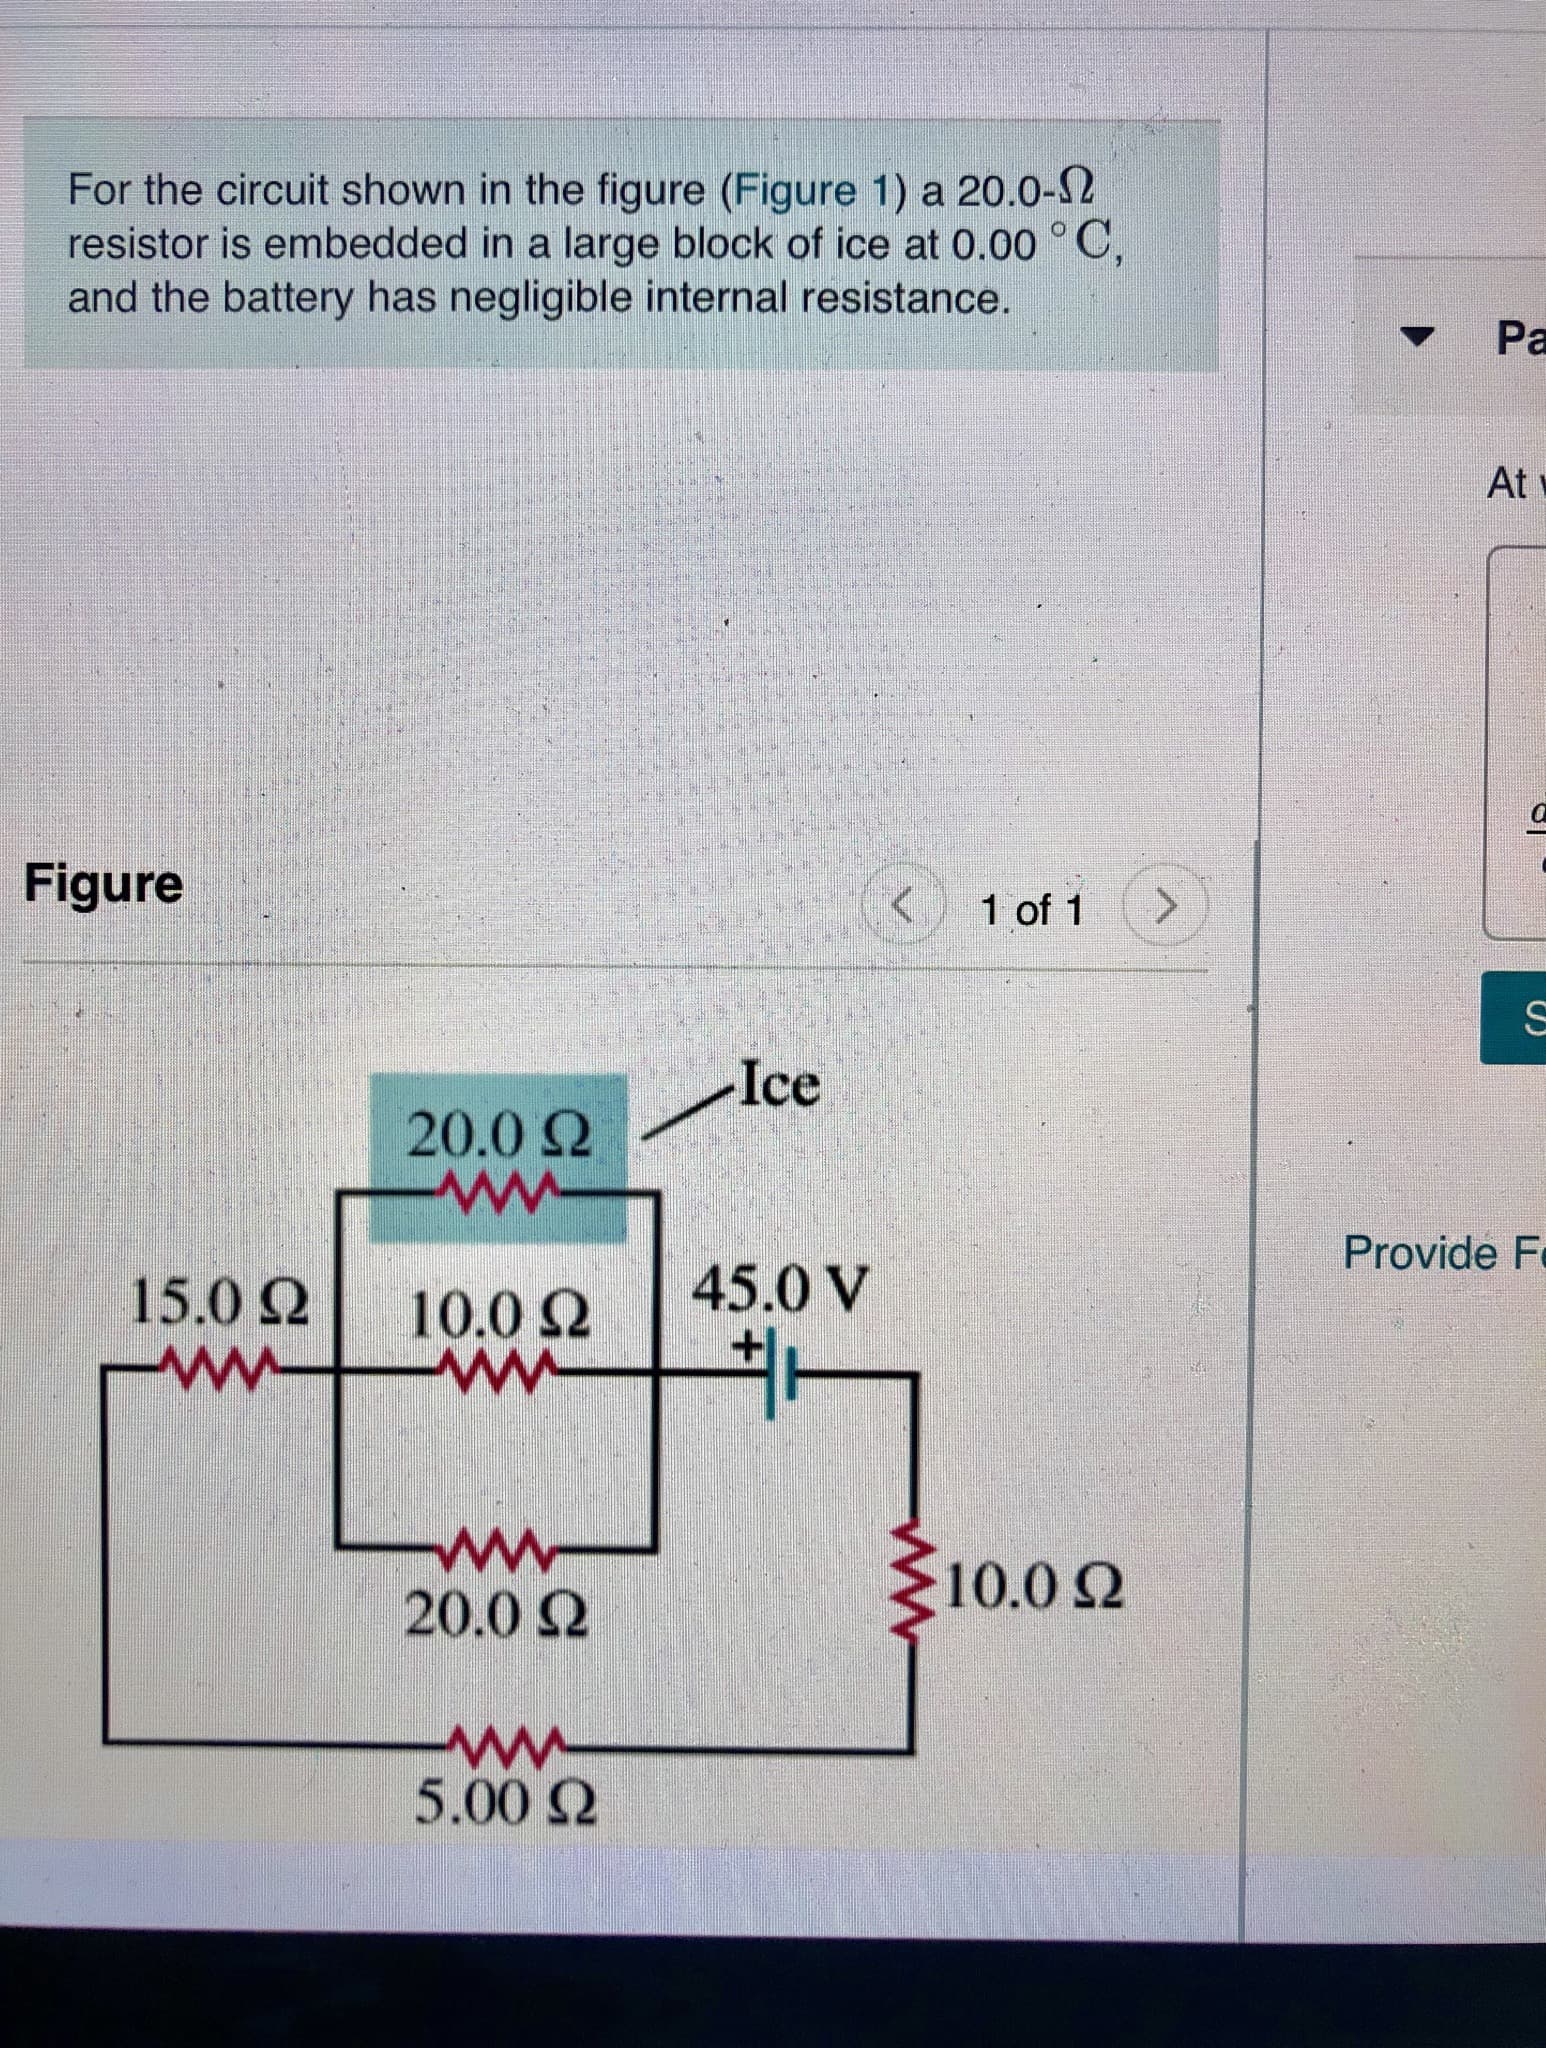 For the circuit shown in the figure (Figure 1) a 20.0-2
resistor is embedded in a large block of ice at 0.00 °C,
and the battery has negligible internal resistance.
Pa
At
Figure
1 of 1
>
Ice
20.0 Q
Provide F
45.0 V
15.0
10.0 Q
ww
20.0 Q
10.02
5.00Q
